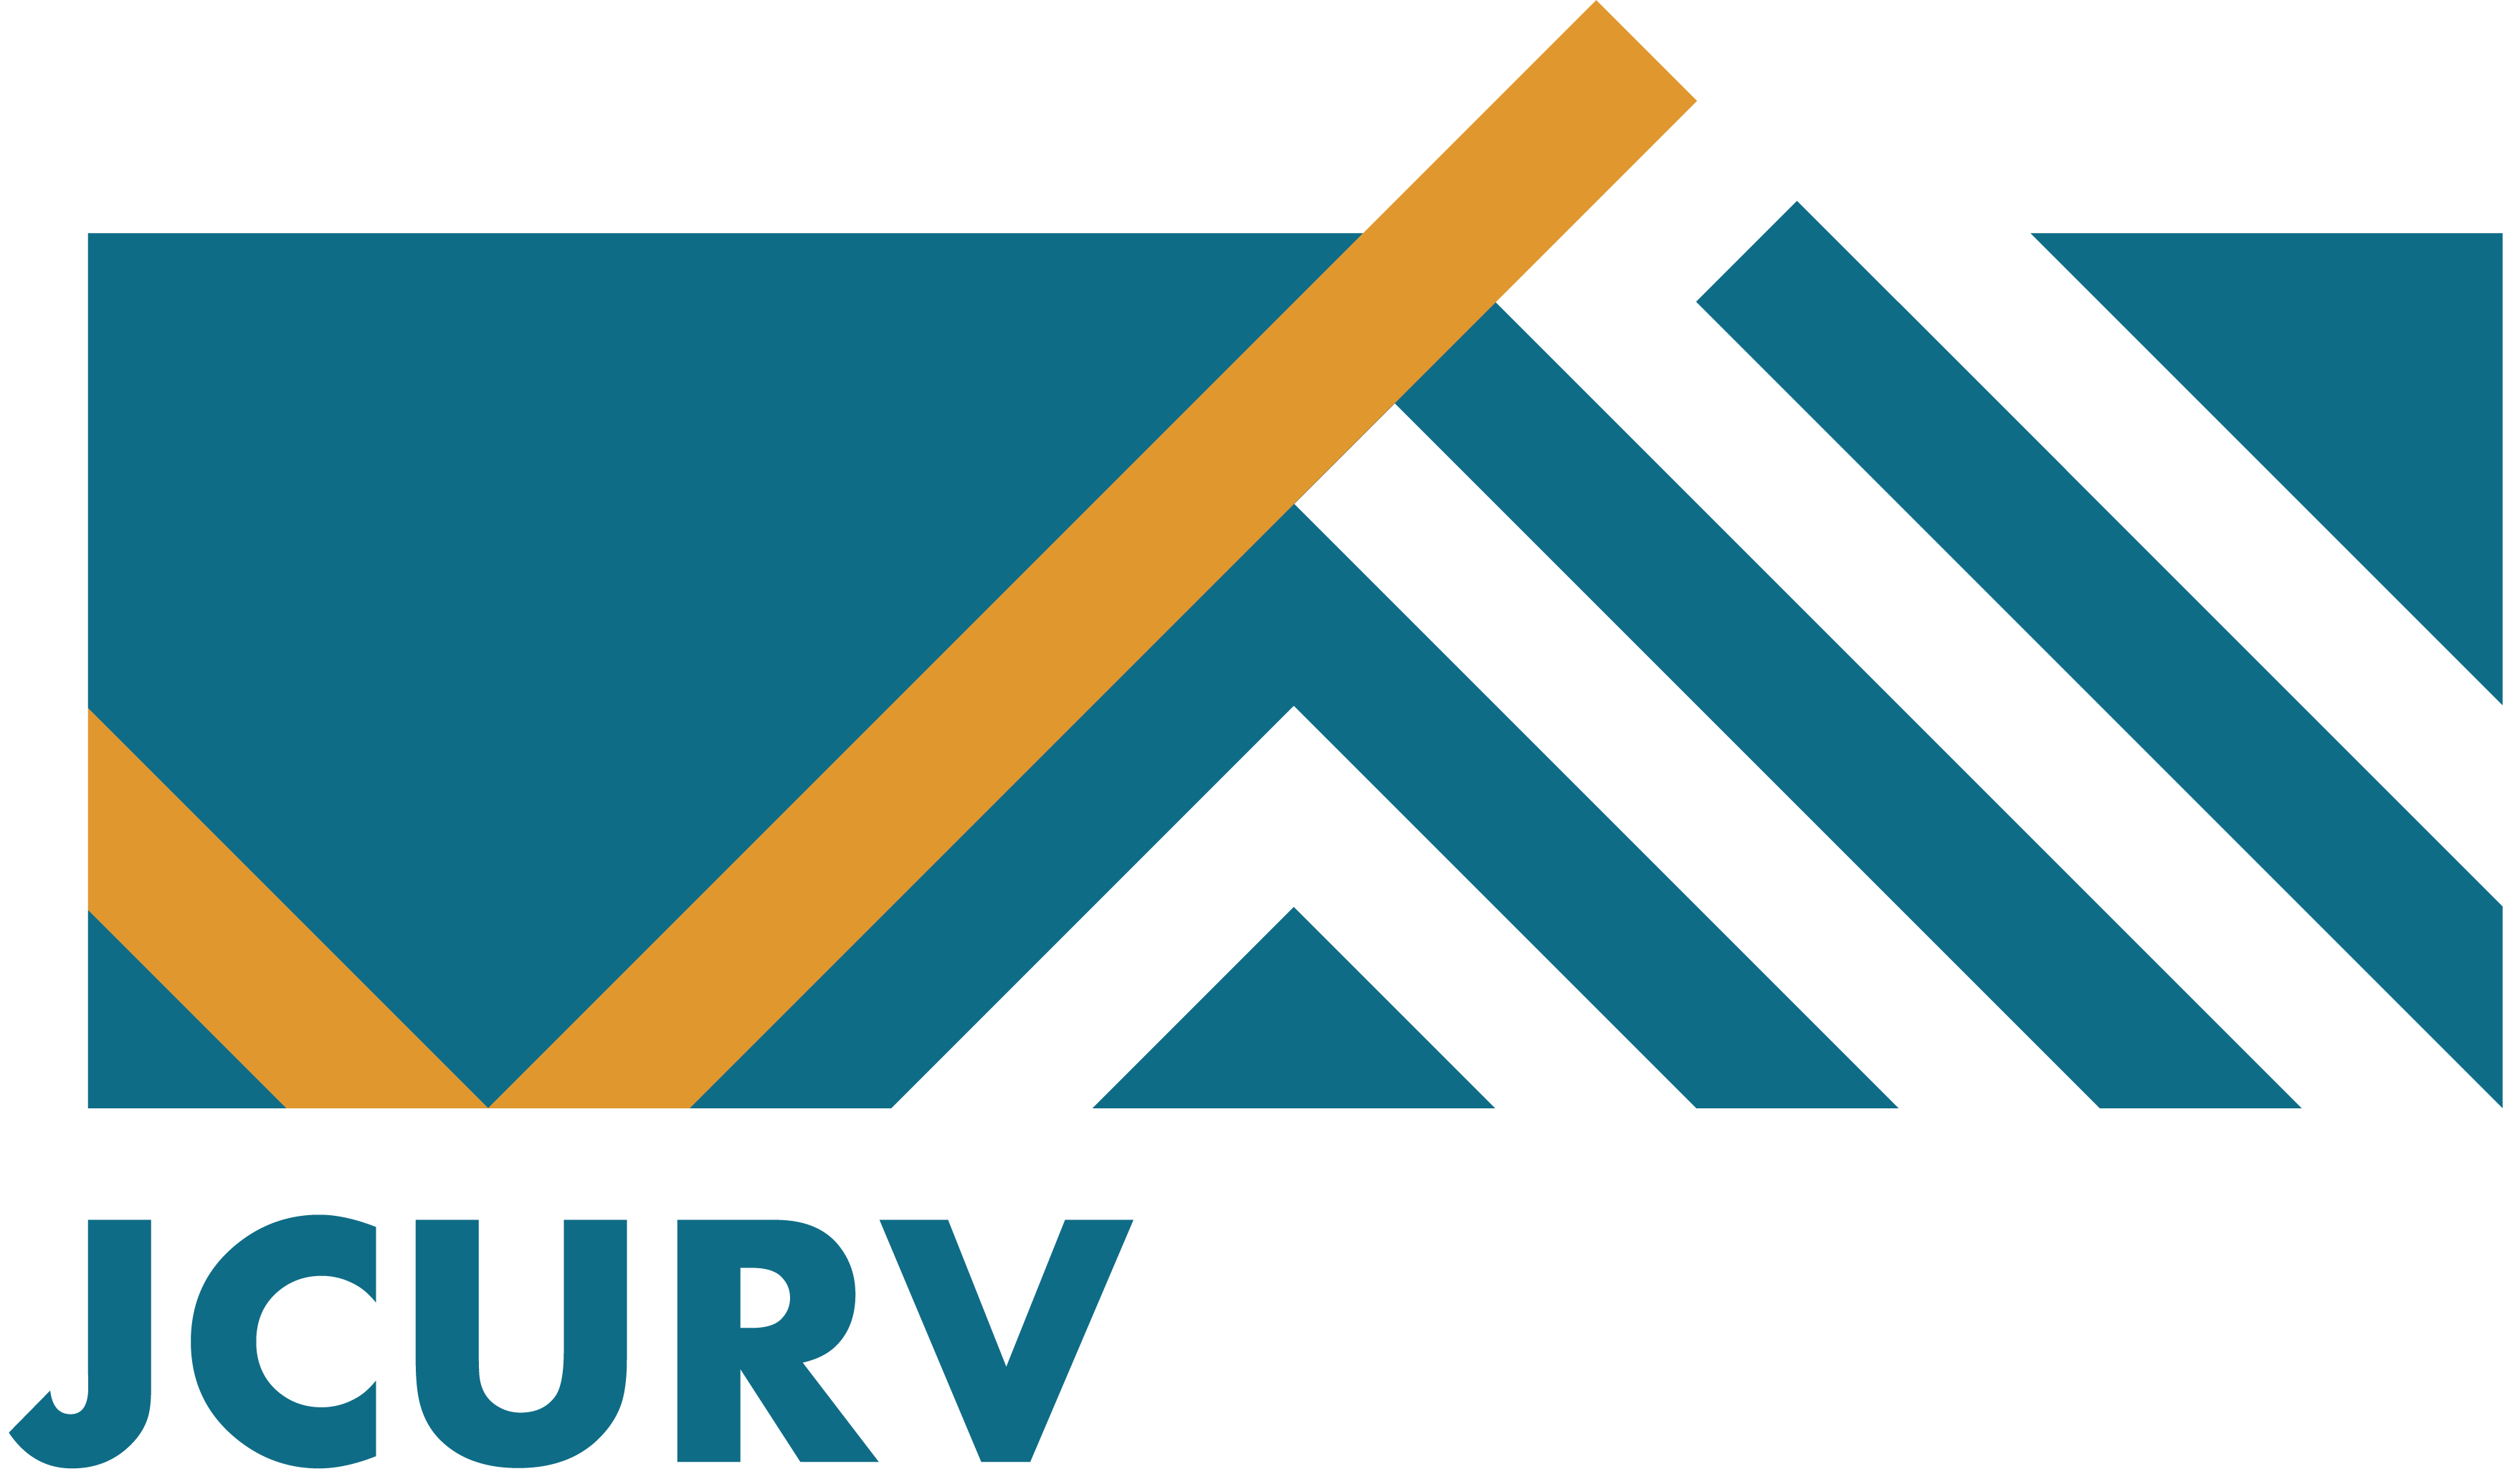 A logo of the urv group